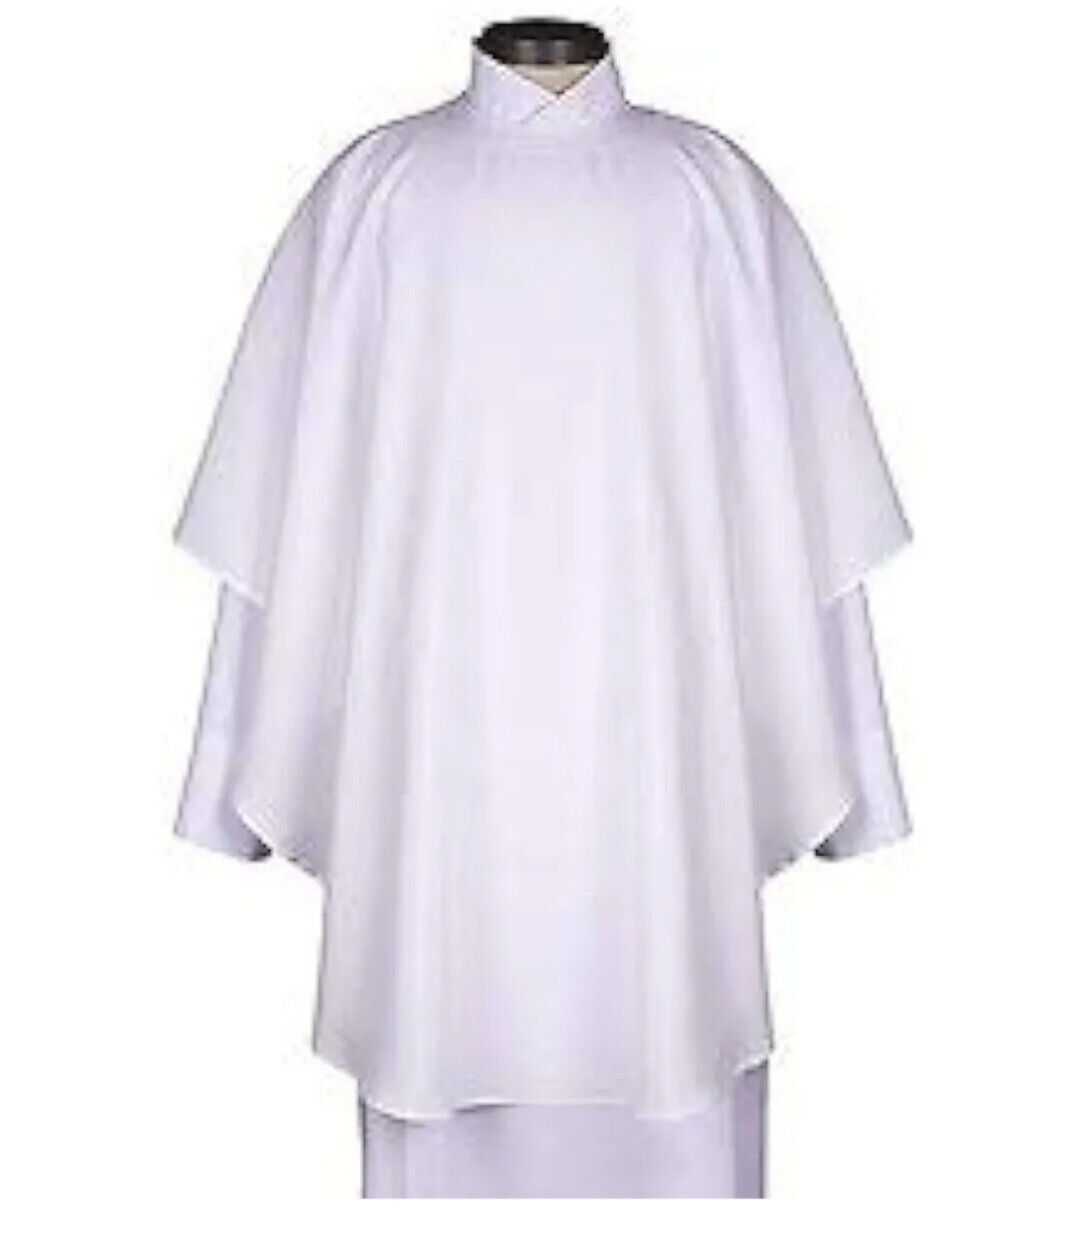 White Chasuble, R J Toomey Everyday, New With Tags